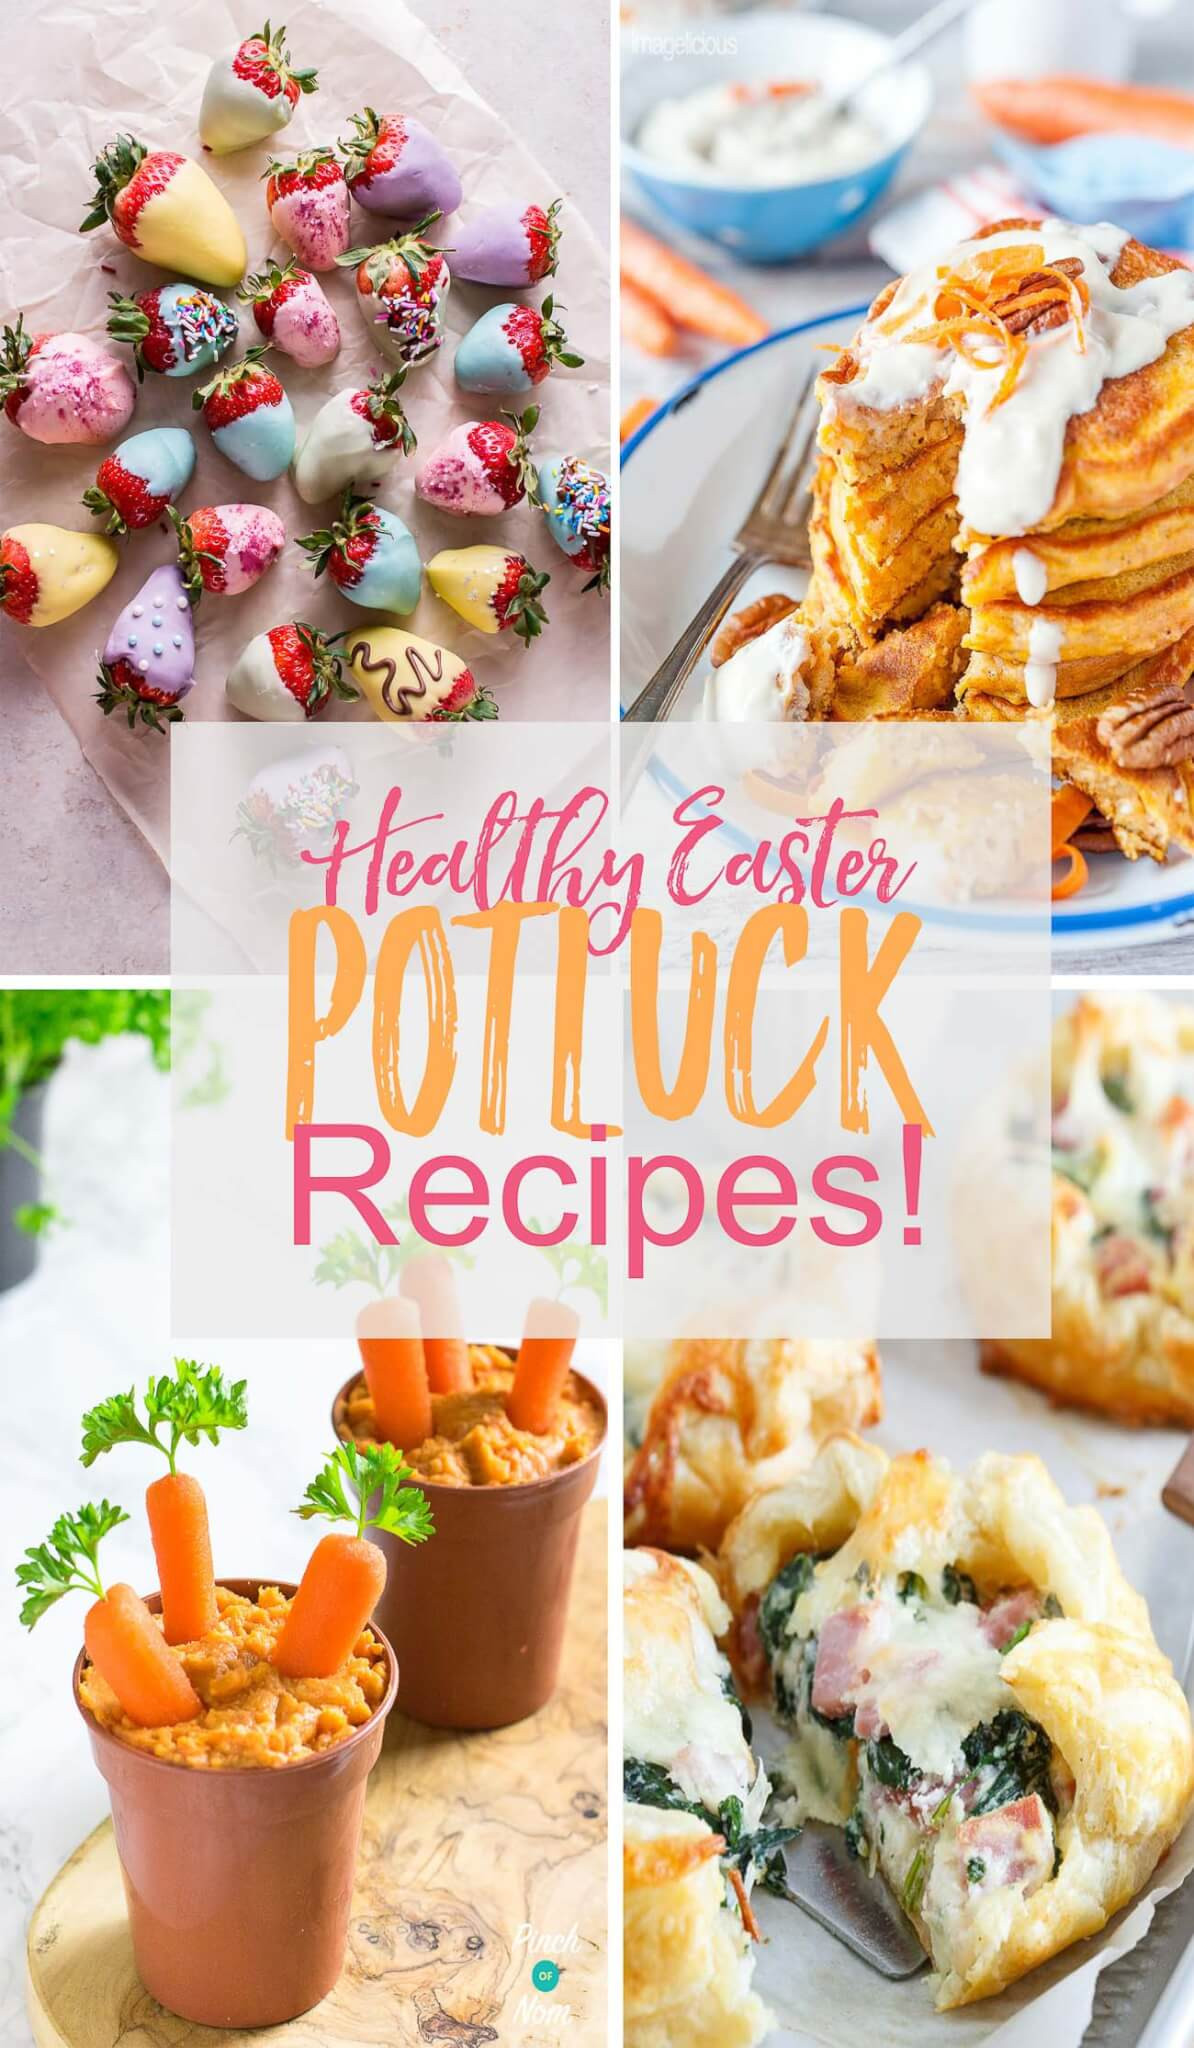 Healthy Easter Dinner Ideas
 12 Healthy Easter Brunch Potluck Recipes The Girl on Bloor